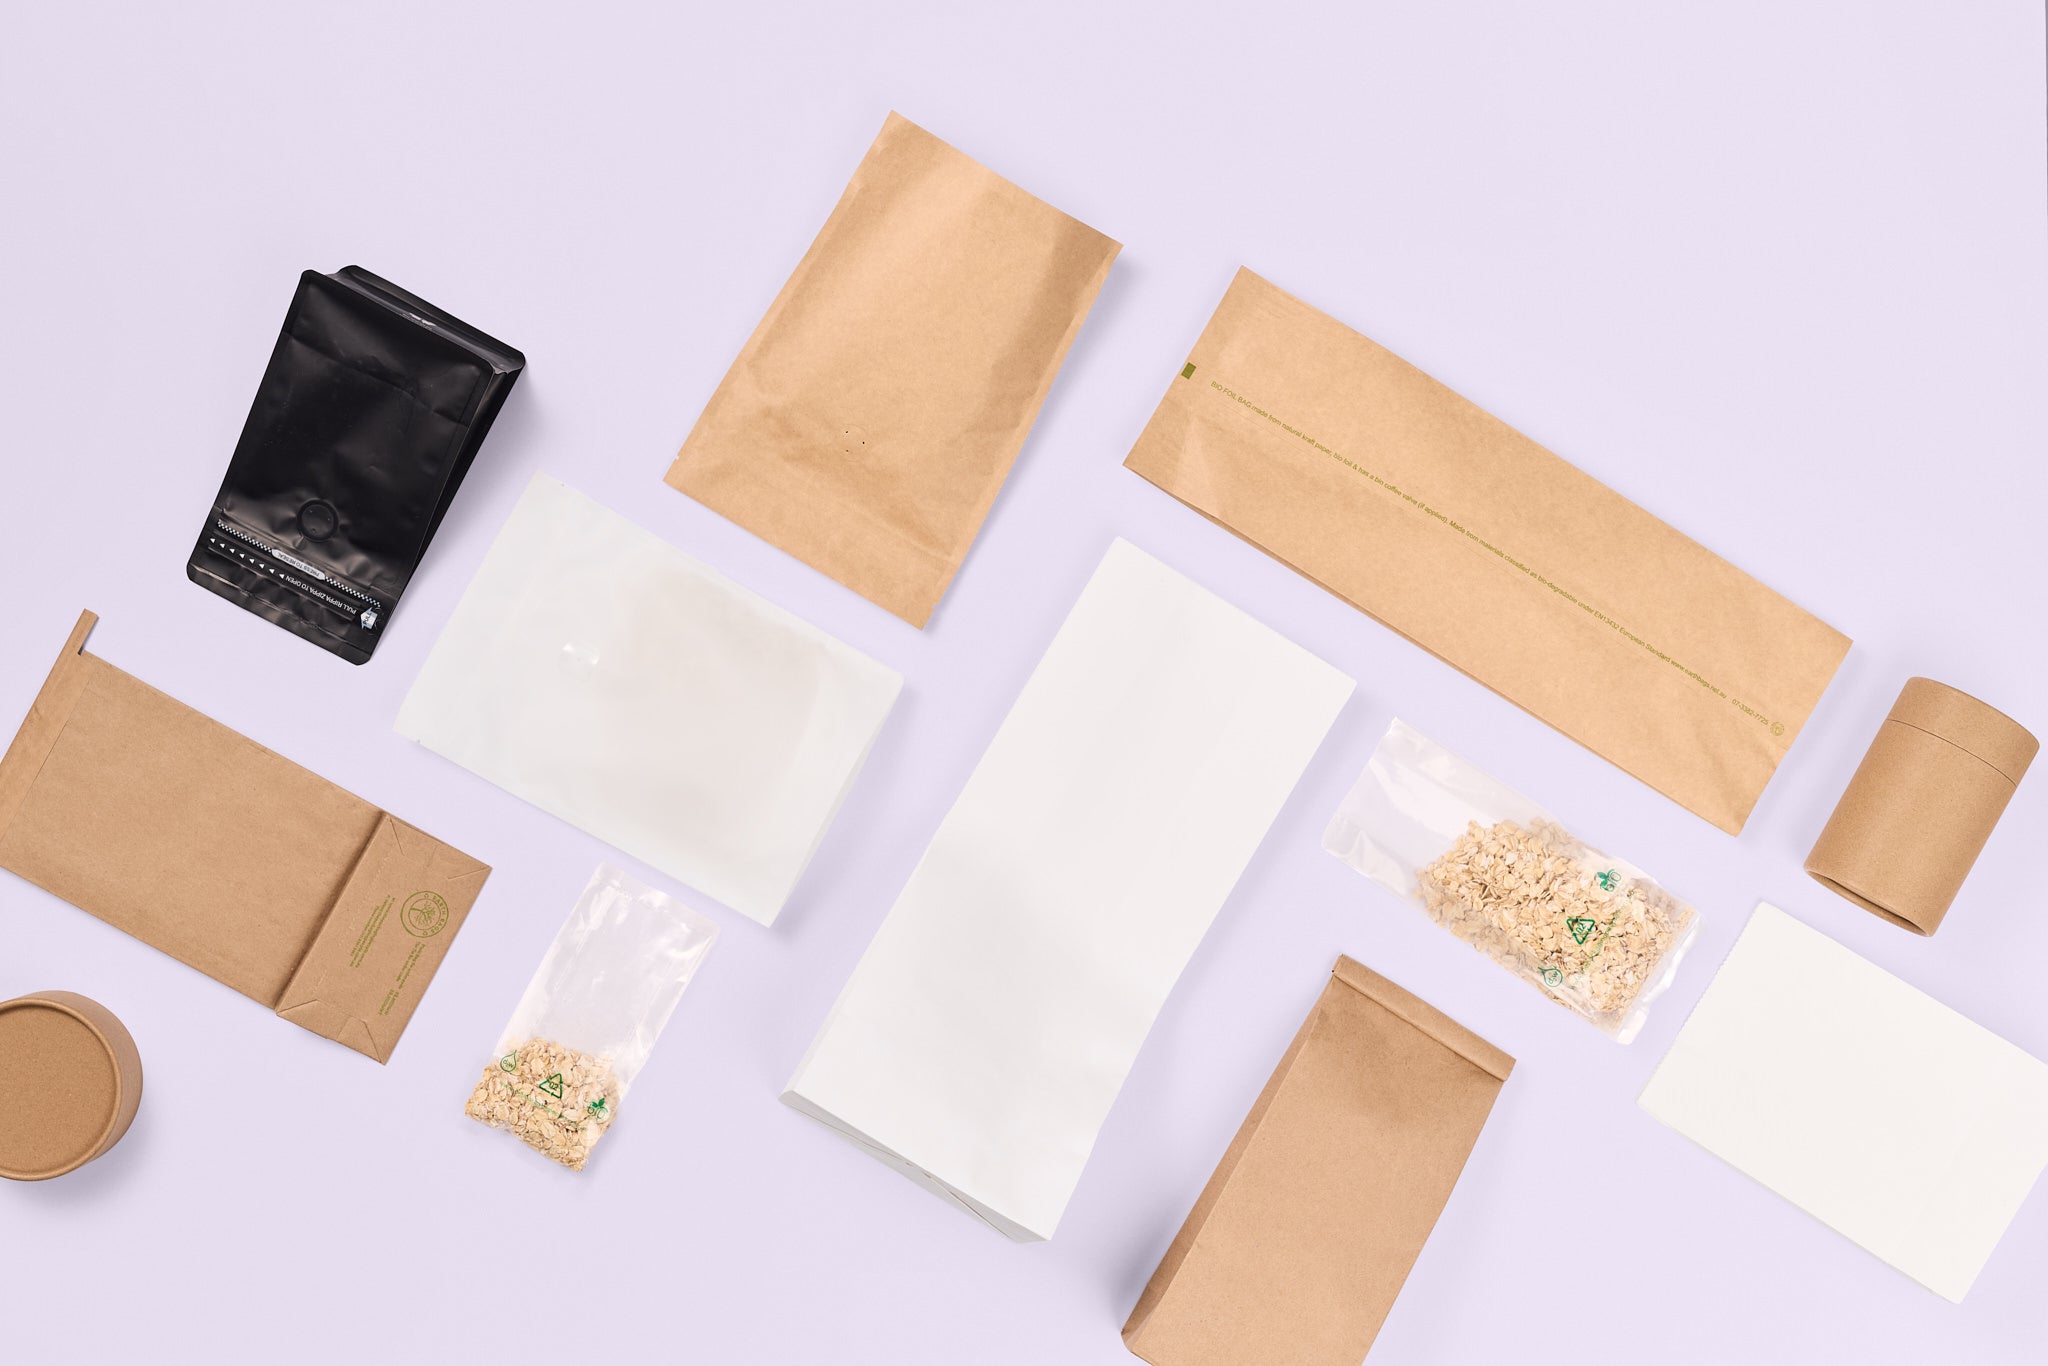 What are the Benefits of Using Eco-Friendly Packaging?